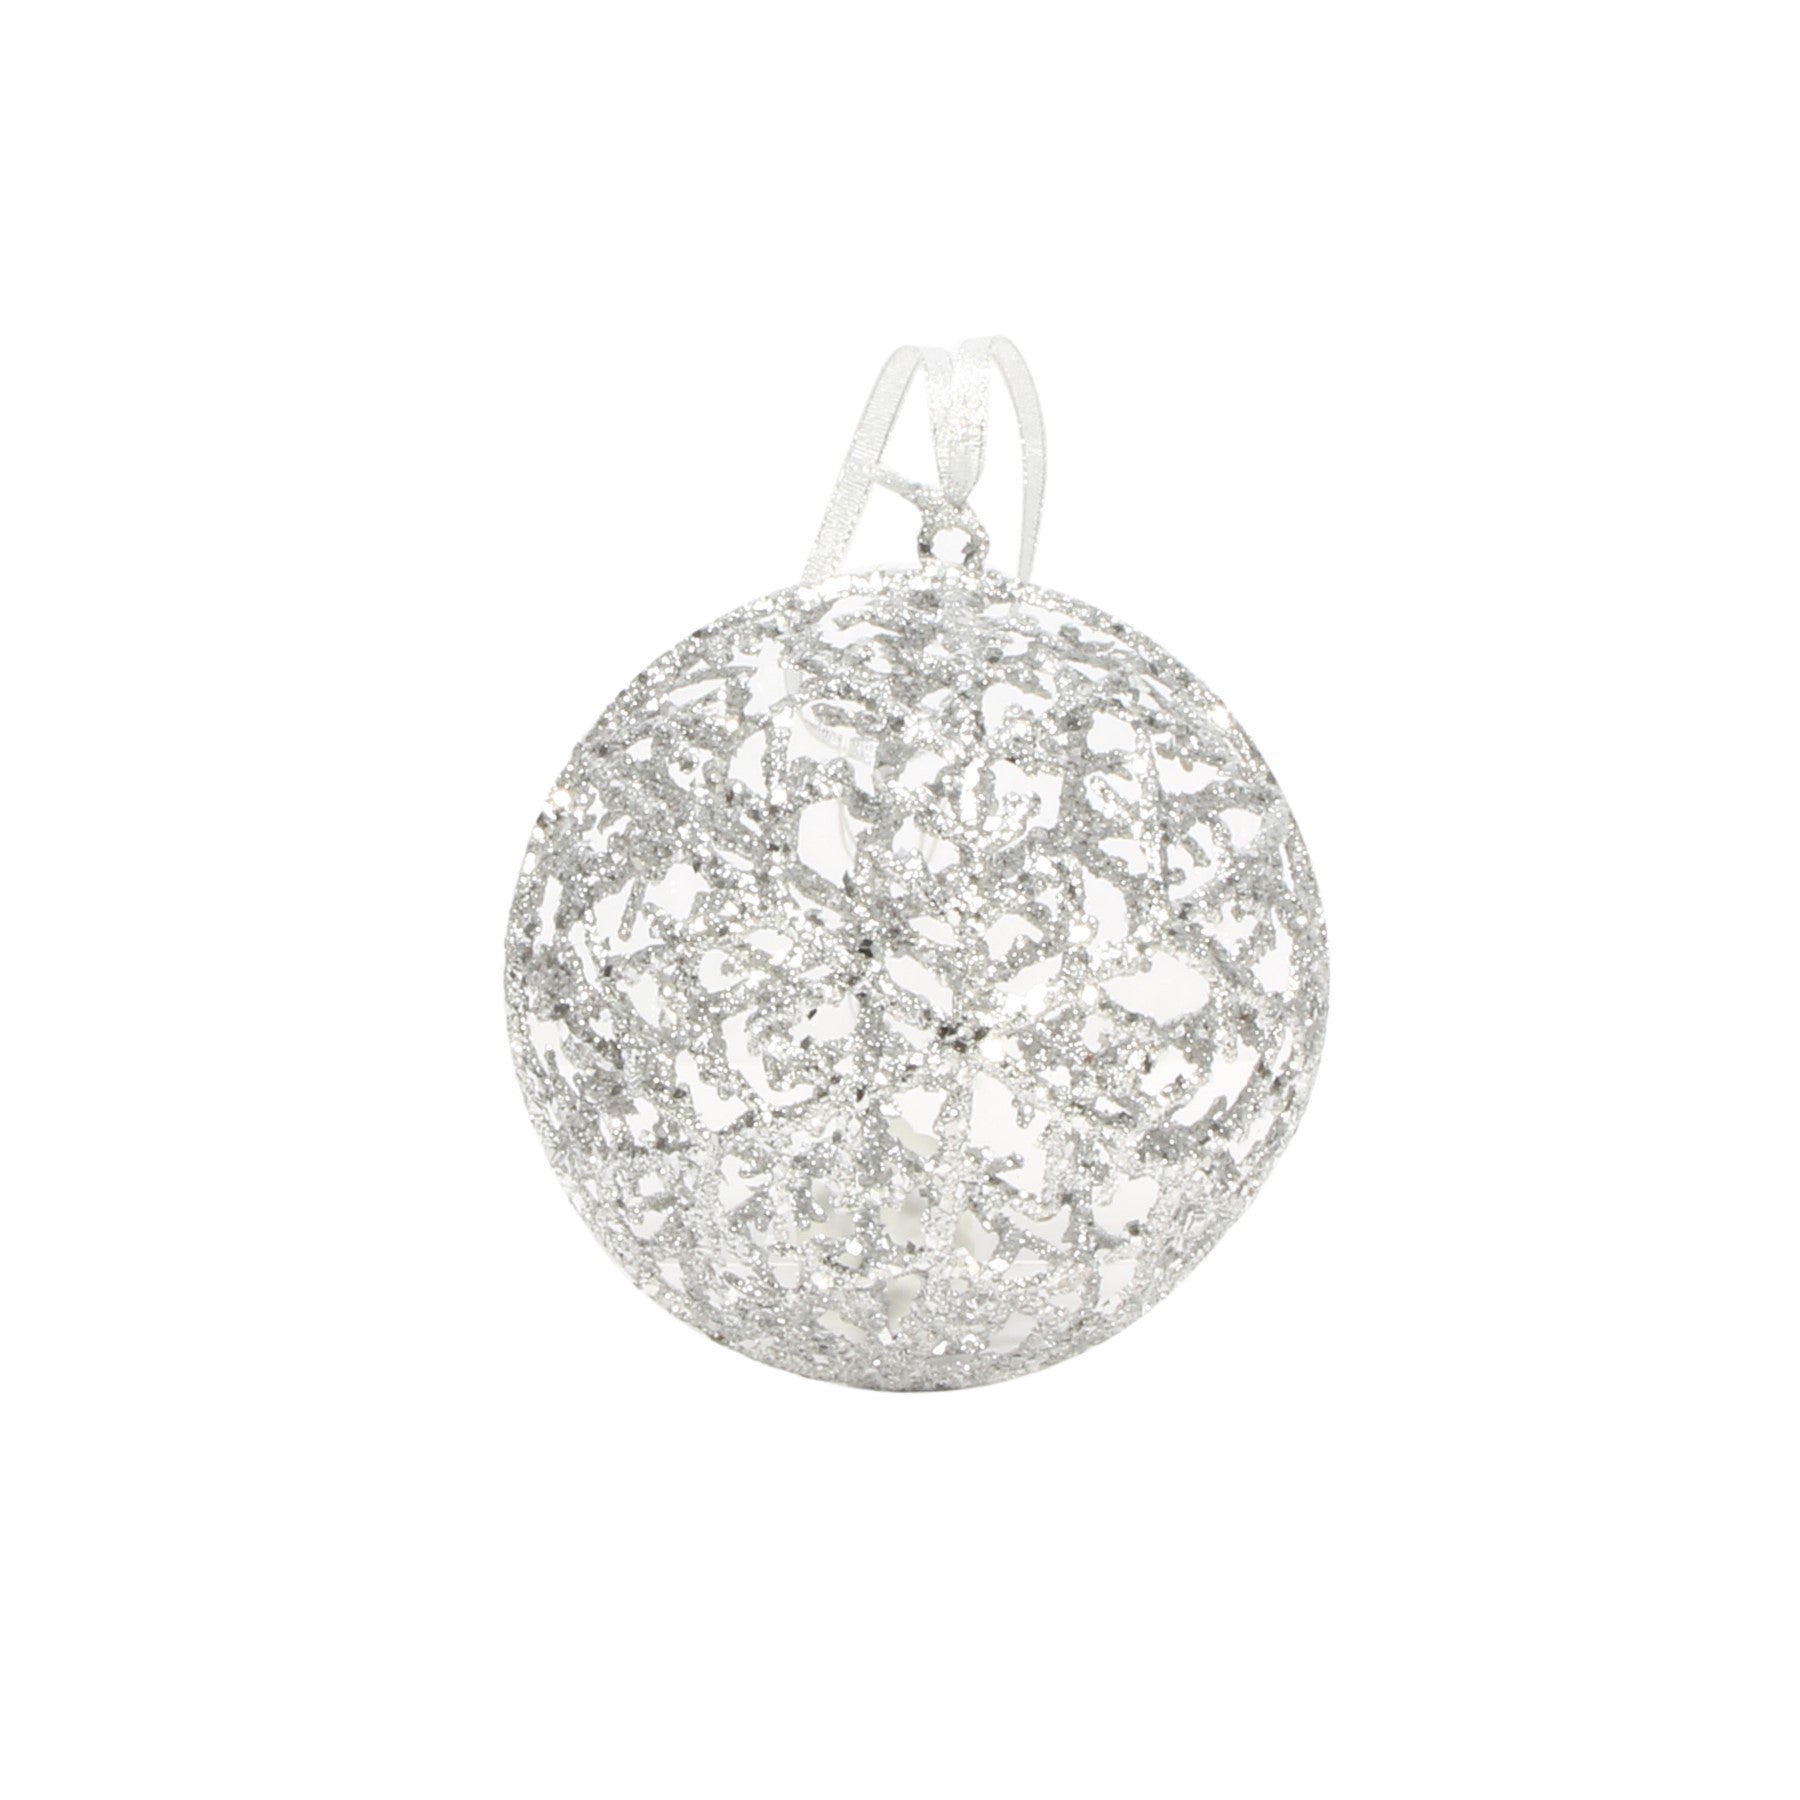 View Silver Glitter Hanging Ball 15cm information